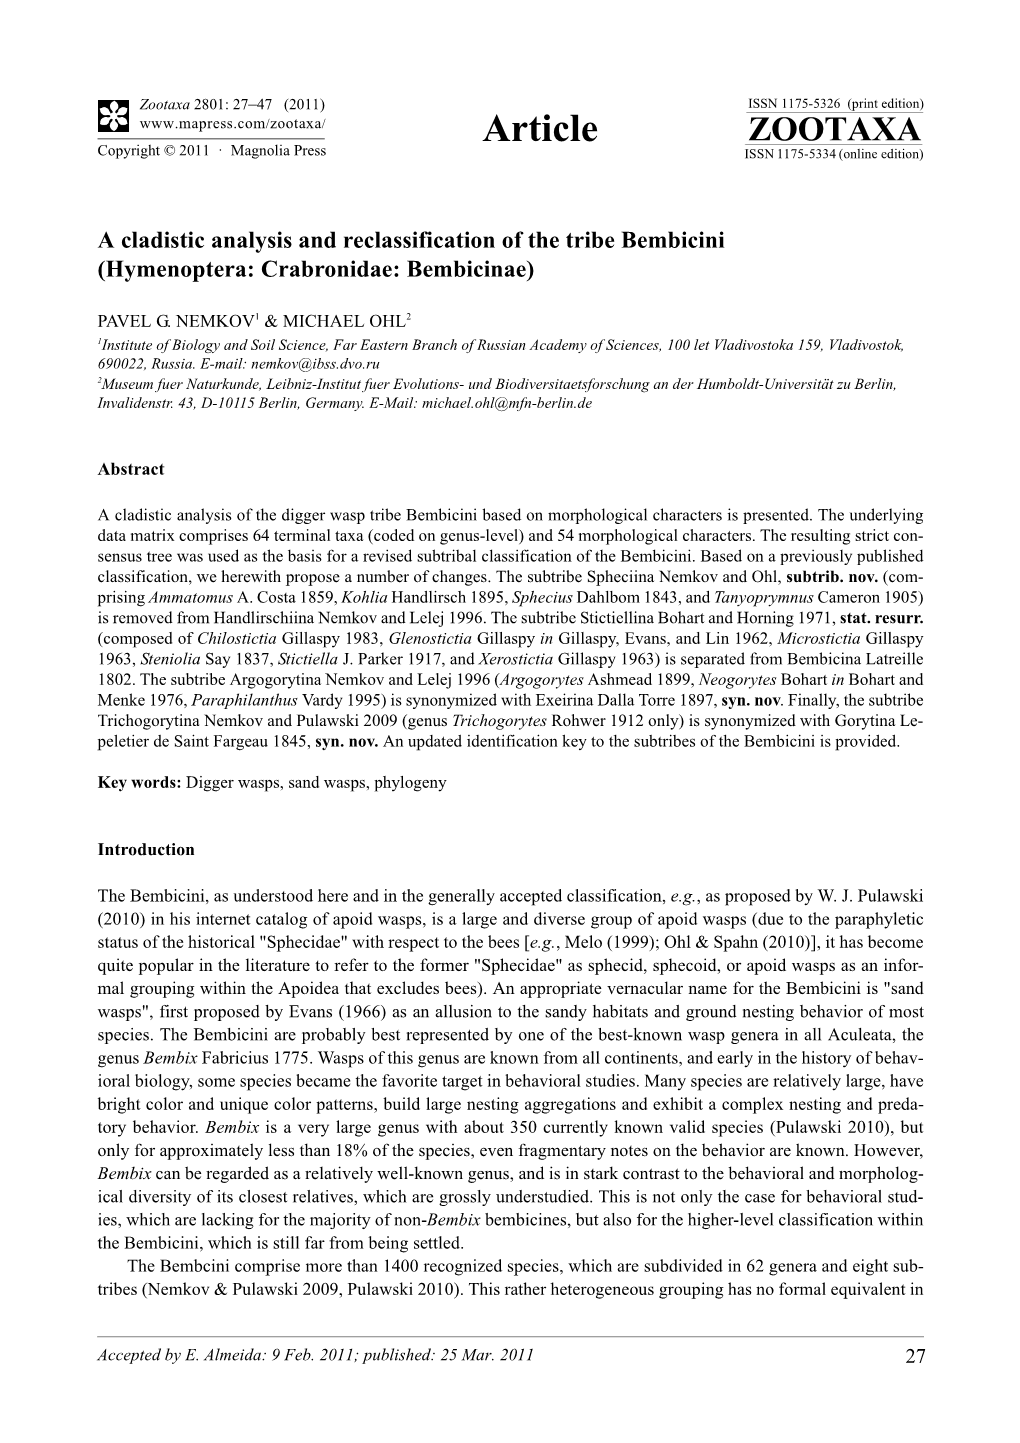 A Cladistic Analysis and Reclassification of the Tribe Bembicini (Hymenoptera: Crabronidae: Bembicinae)